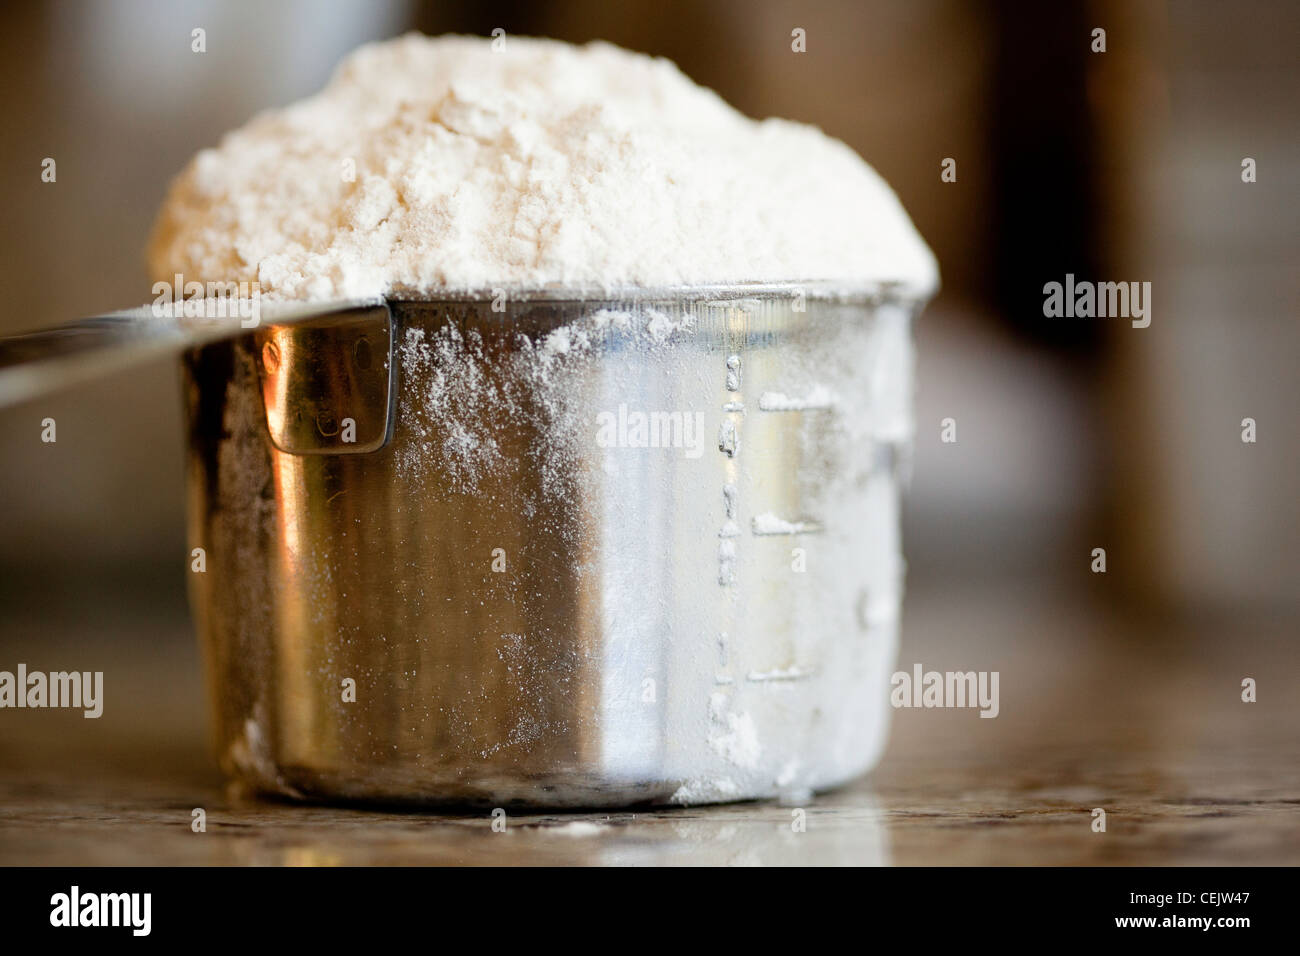 Flour in measuring cup Stock Photo